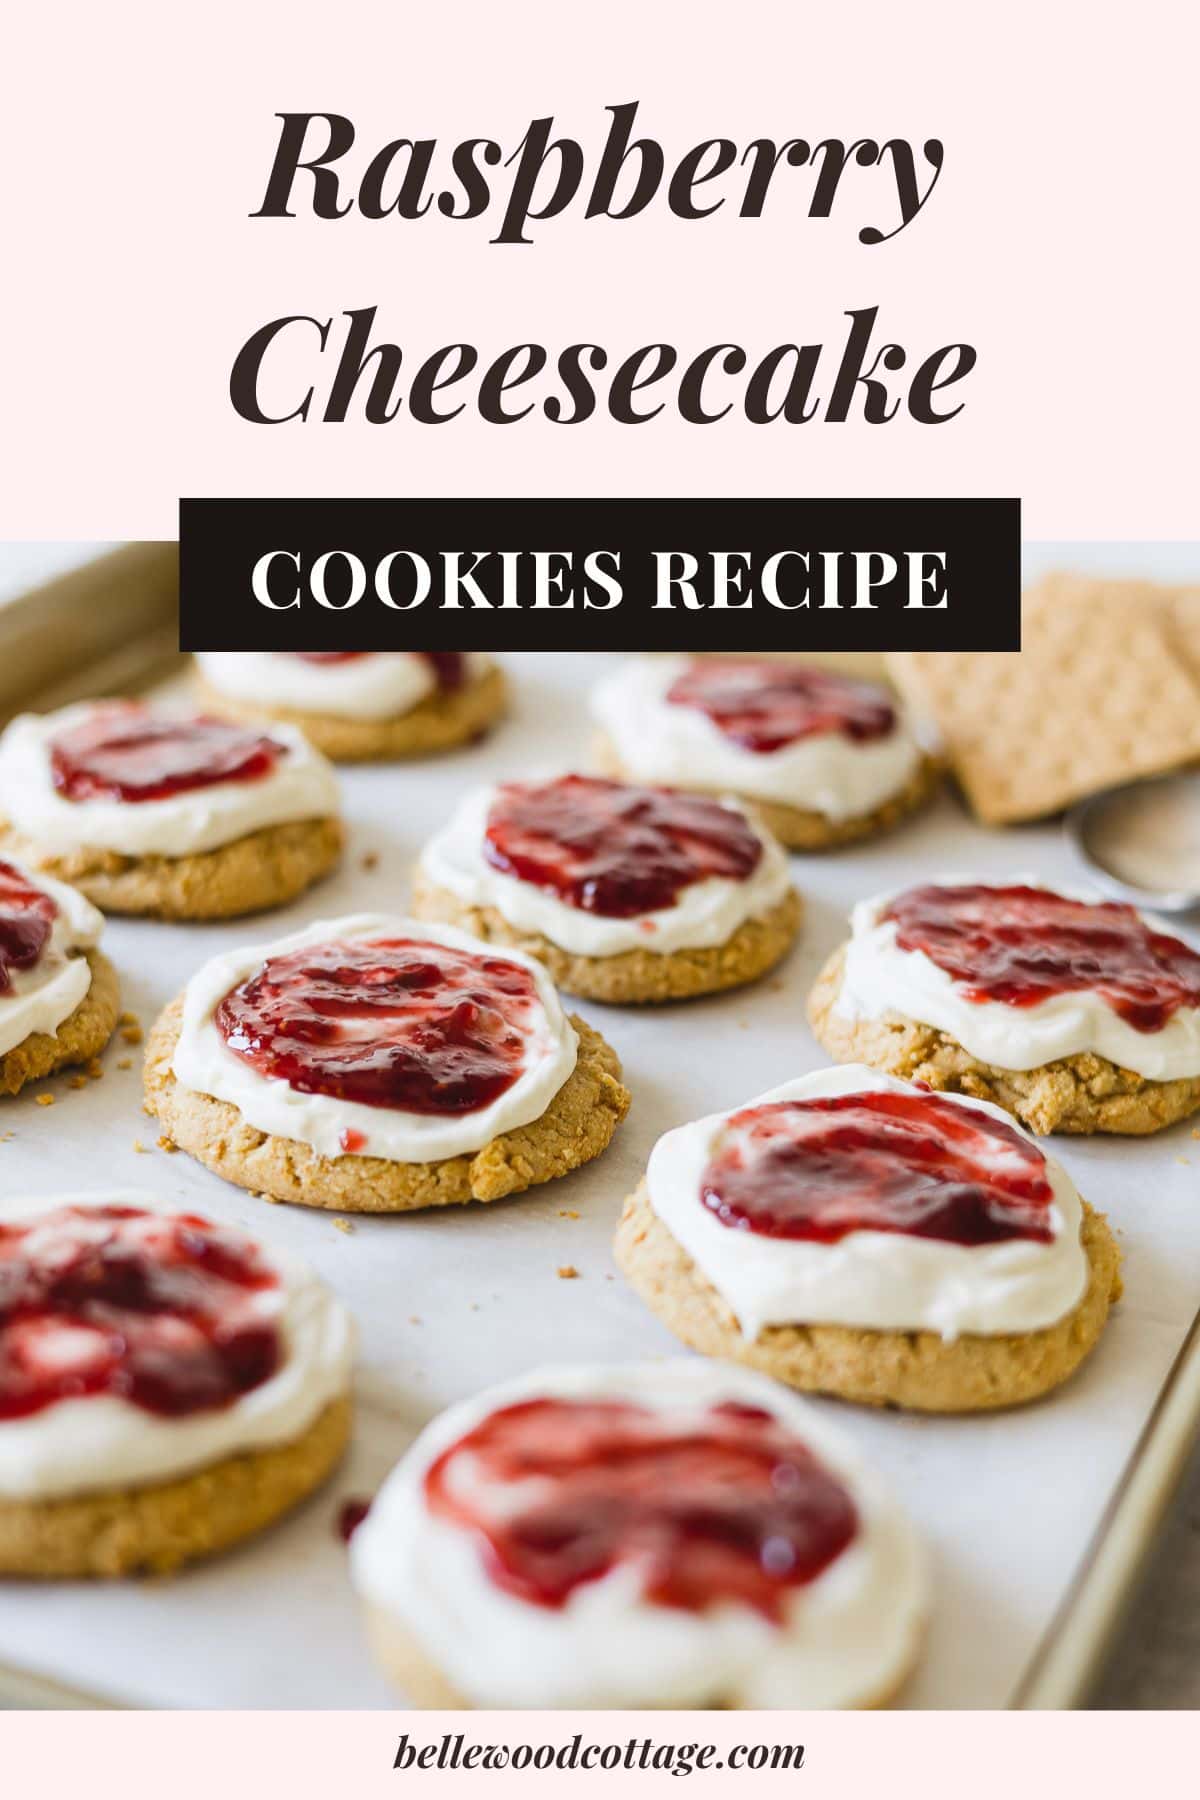 Graham Cracker Cookies with Cheesecake Frosting and Raspberry Jam with the words, "Raspberry Cheesecake Cookies."